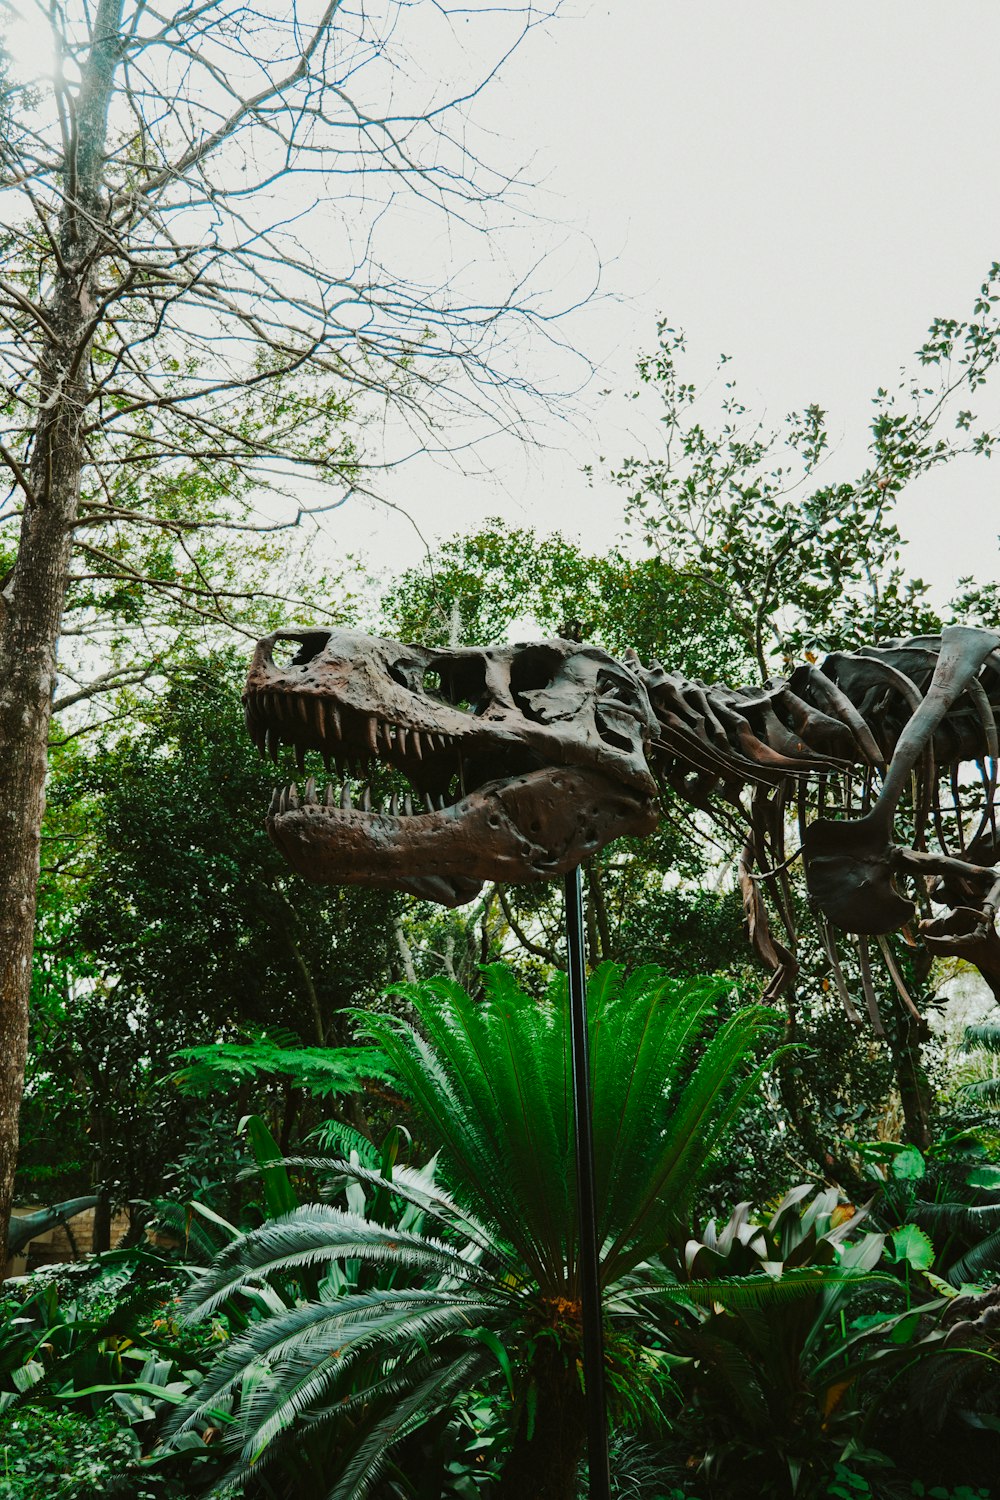 a dinosaur skeleton in the middle of a forest